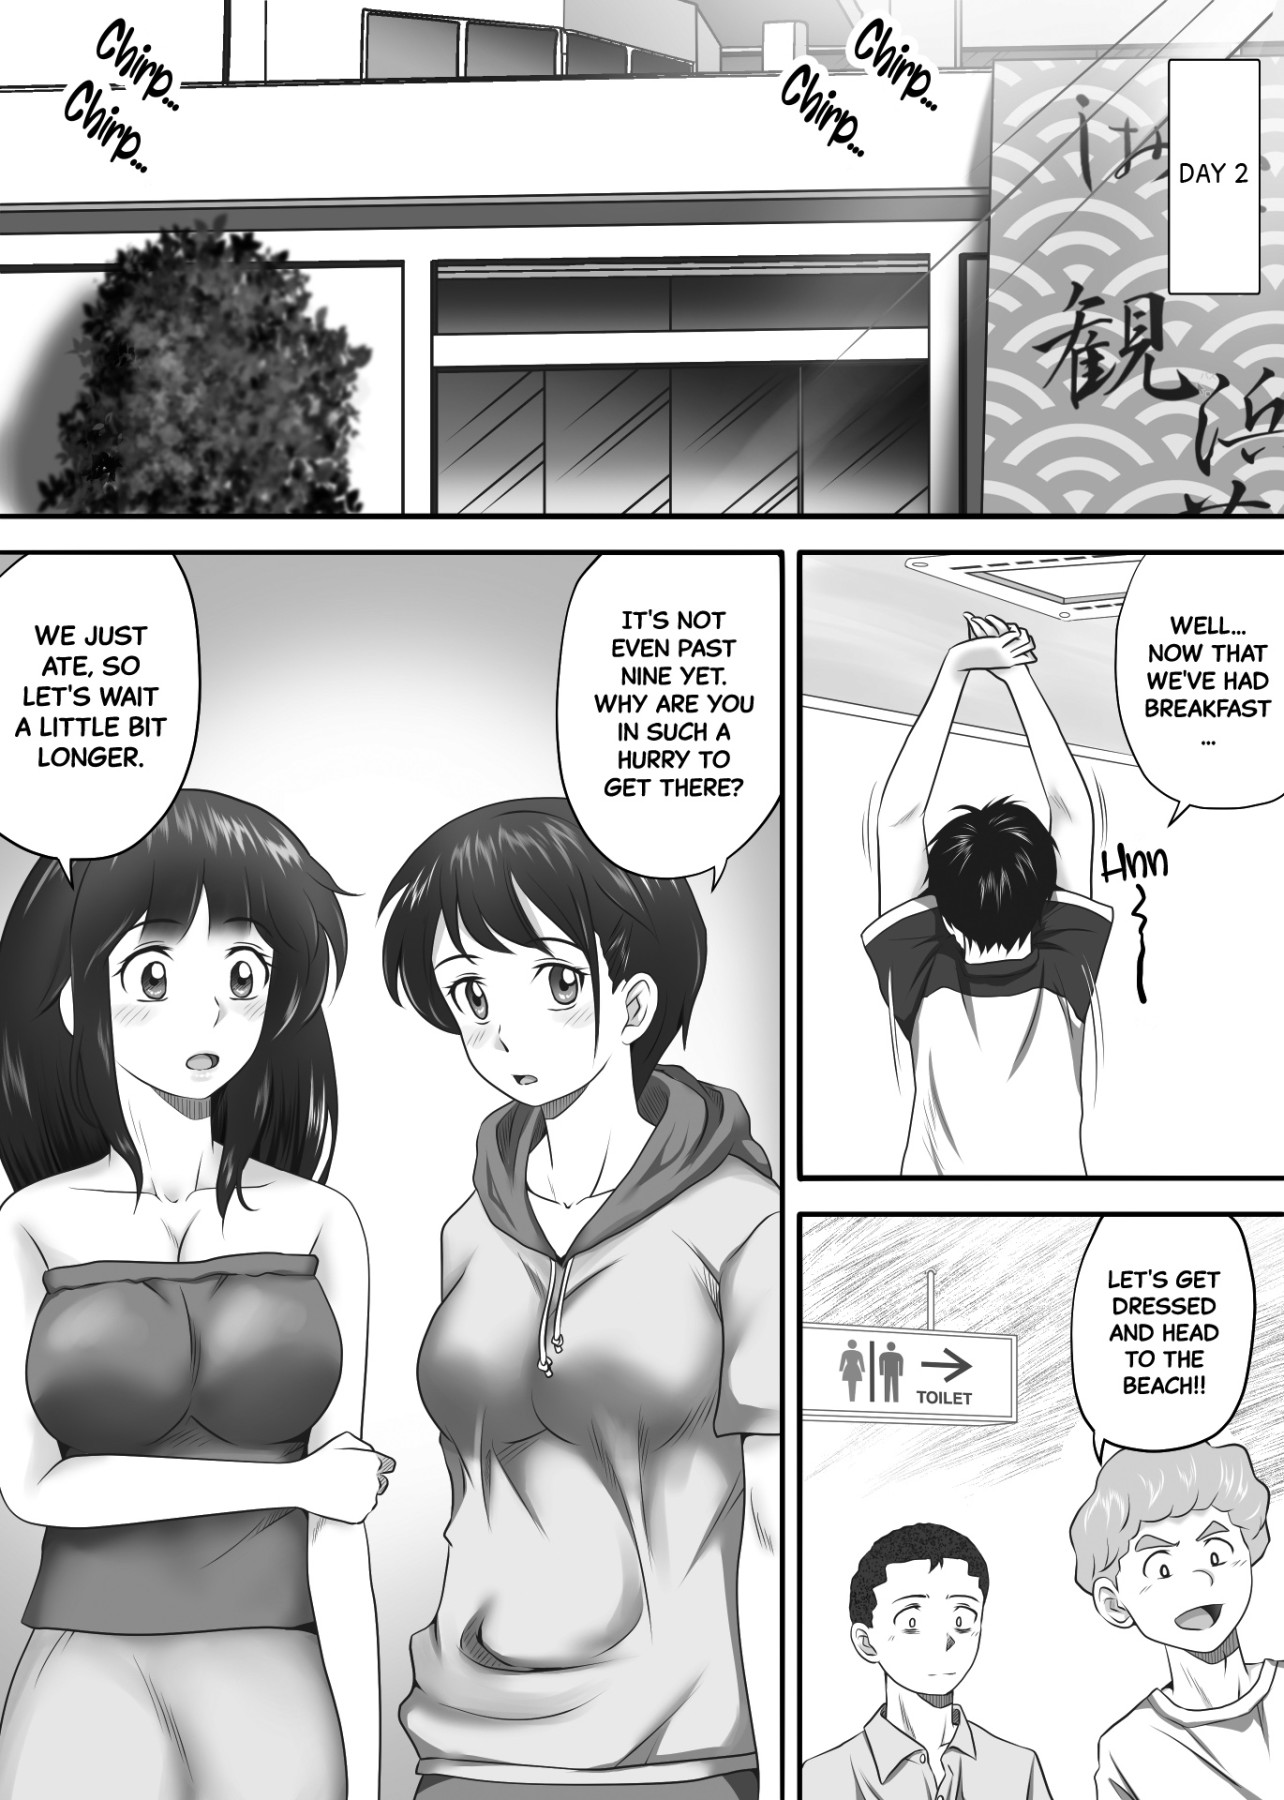 Hentai Manga Comic-Leftover 2 -The Girl of My Dreams Learned How to Orgasm The Day After She Lost Her Virginity--Read-3